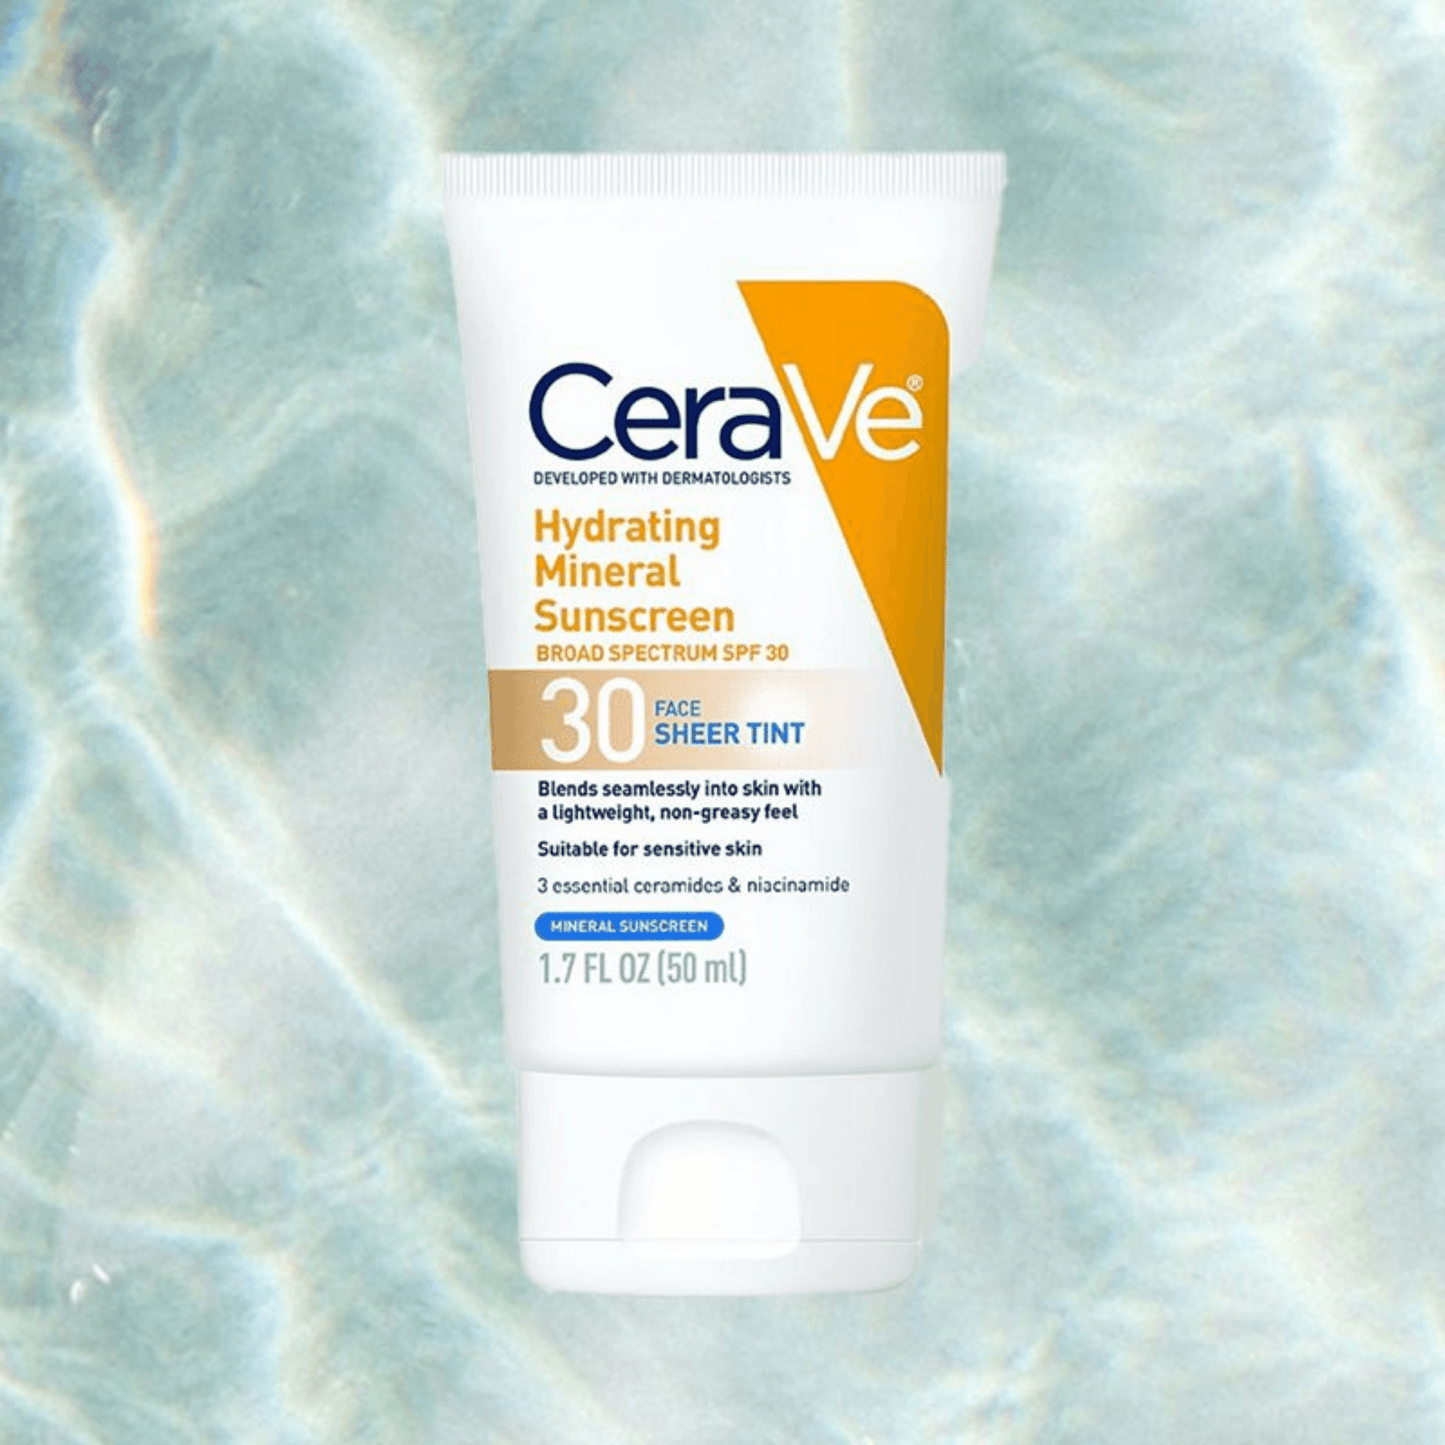 CeraVe Hydrating Mineral Sunscreen SPF 30 Face Sheer Tint (50ml)